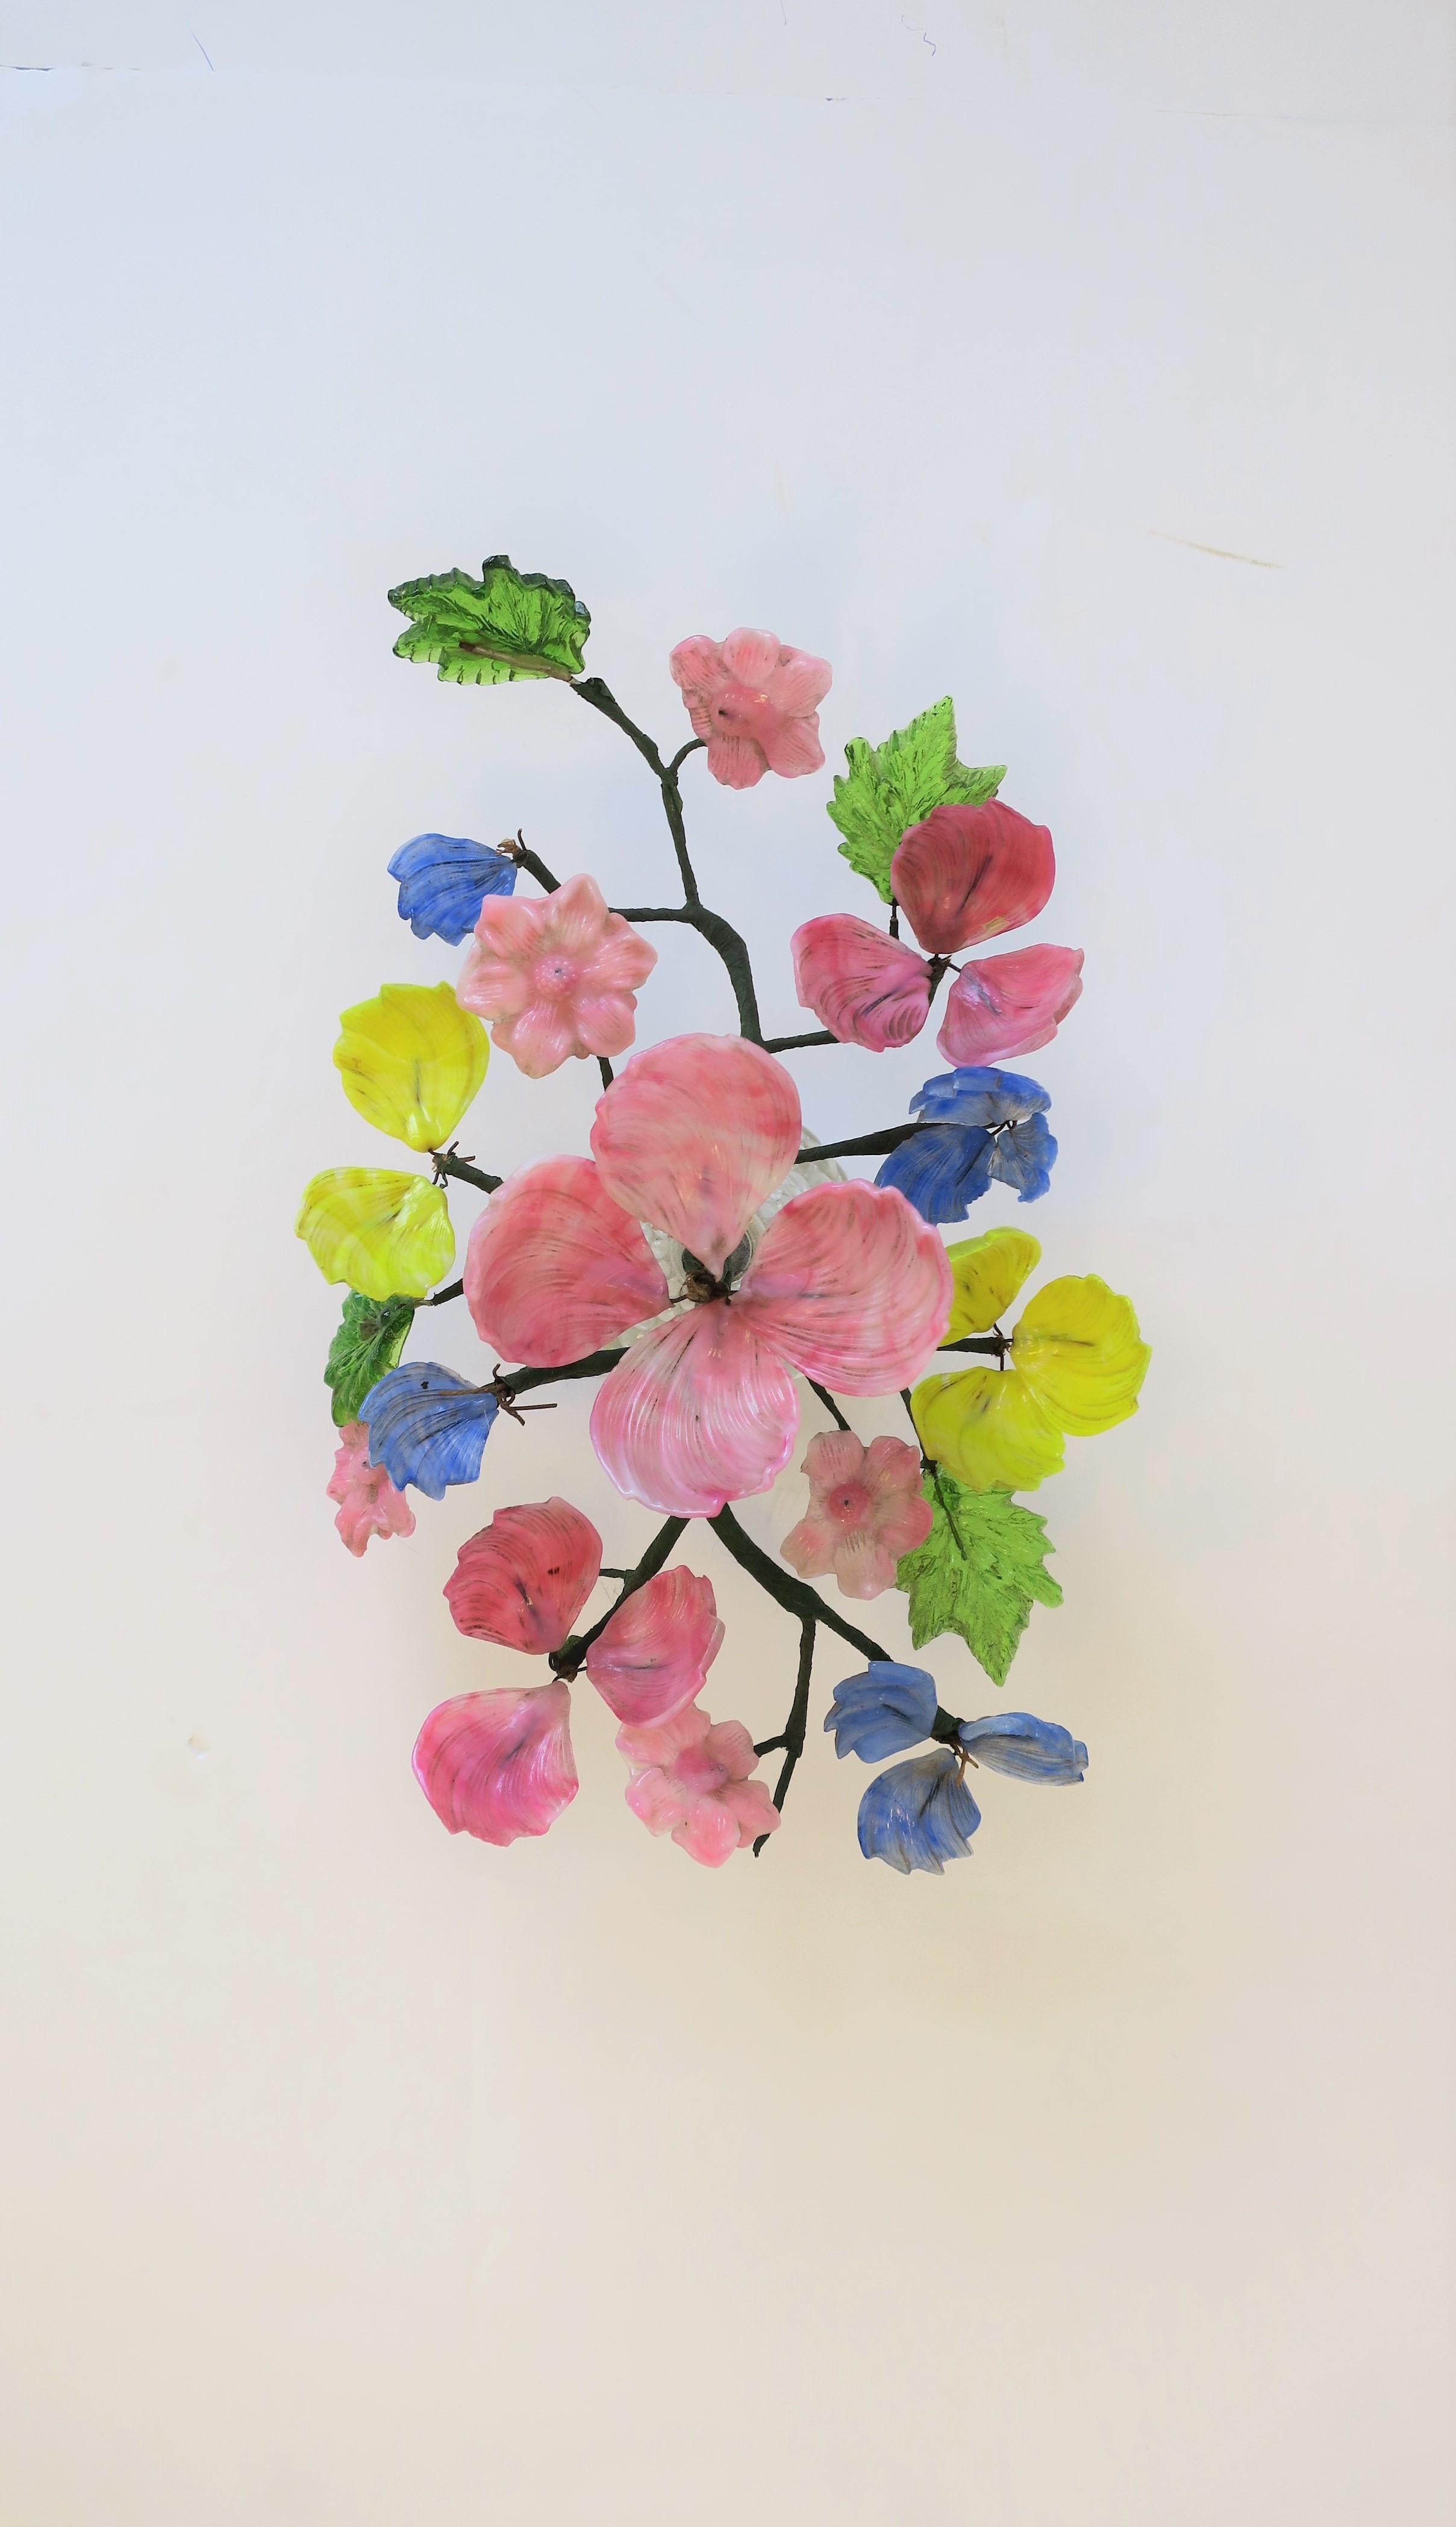 A very beautiful Mid-20th century Italian art glass floral arrangement sculpture piece. Art glass flower and leaf colors include, blue, pink, yellow and green, with mounting to a clear art glass base.

Piece measures: 13